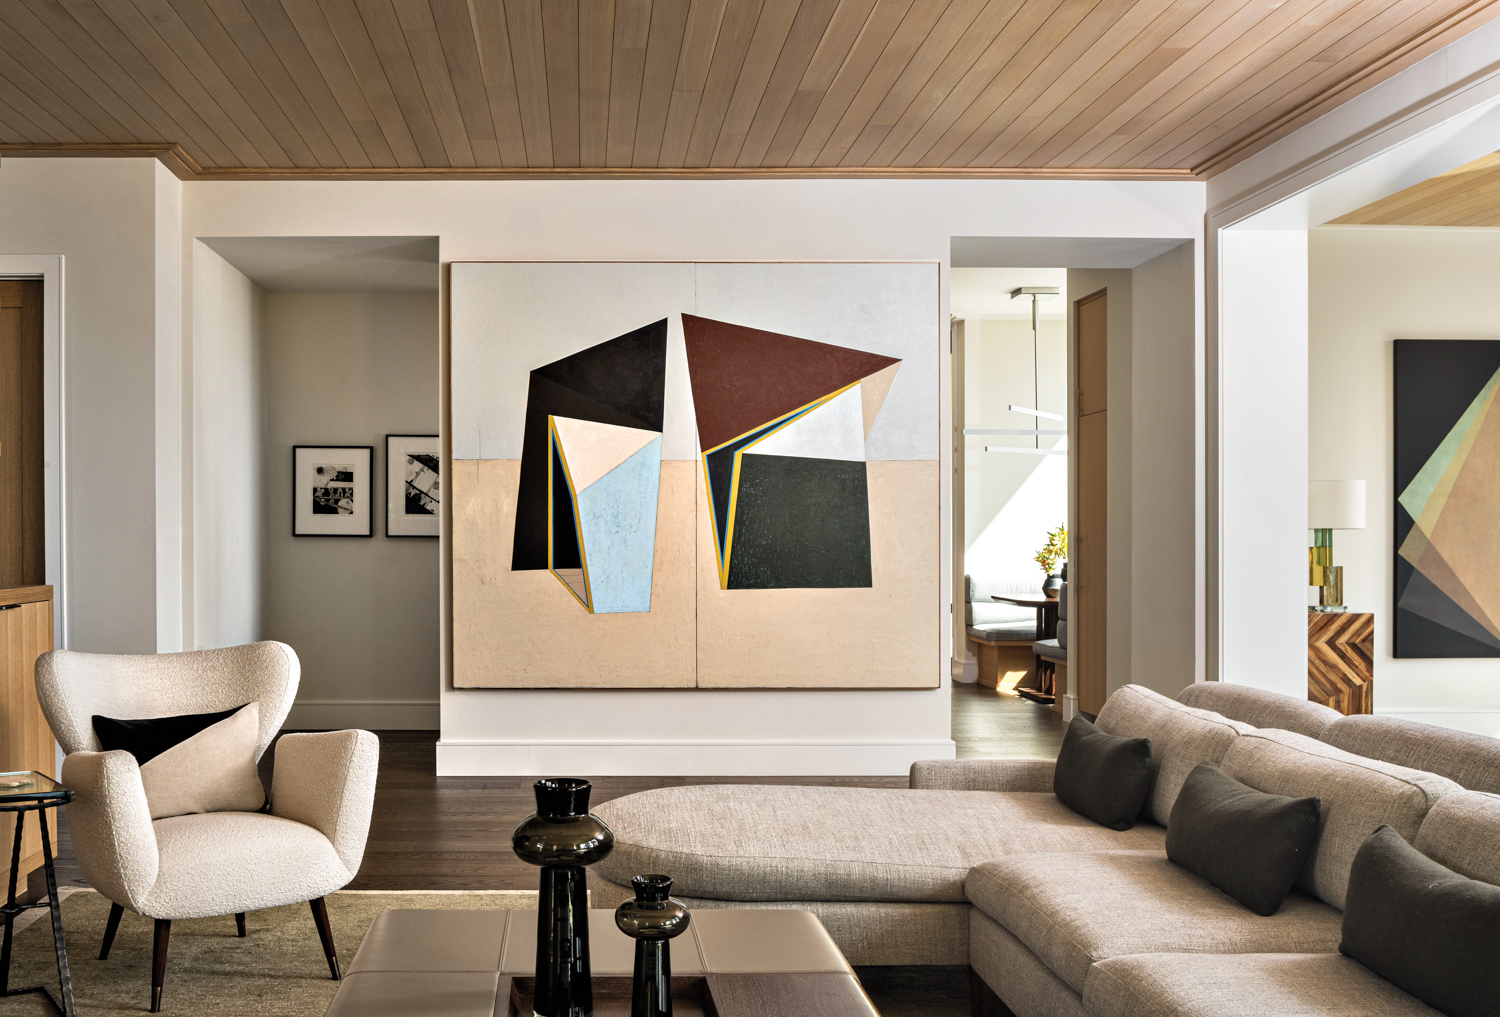 What Does It Look Like When A Home Is Built Around Modern Art?